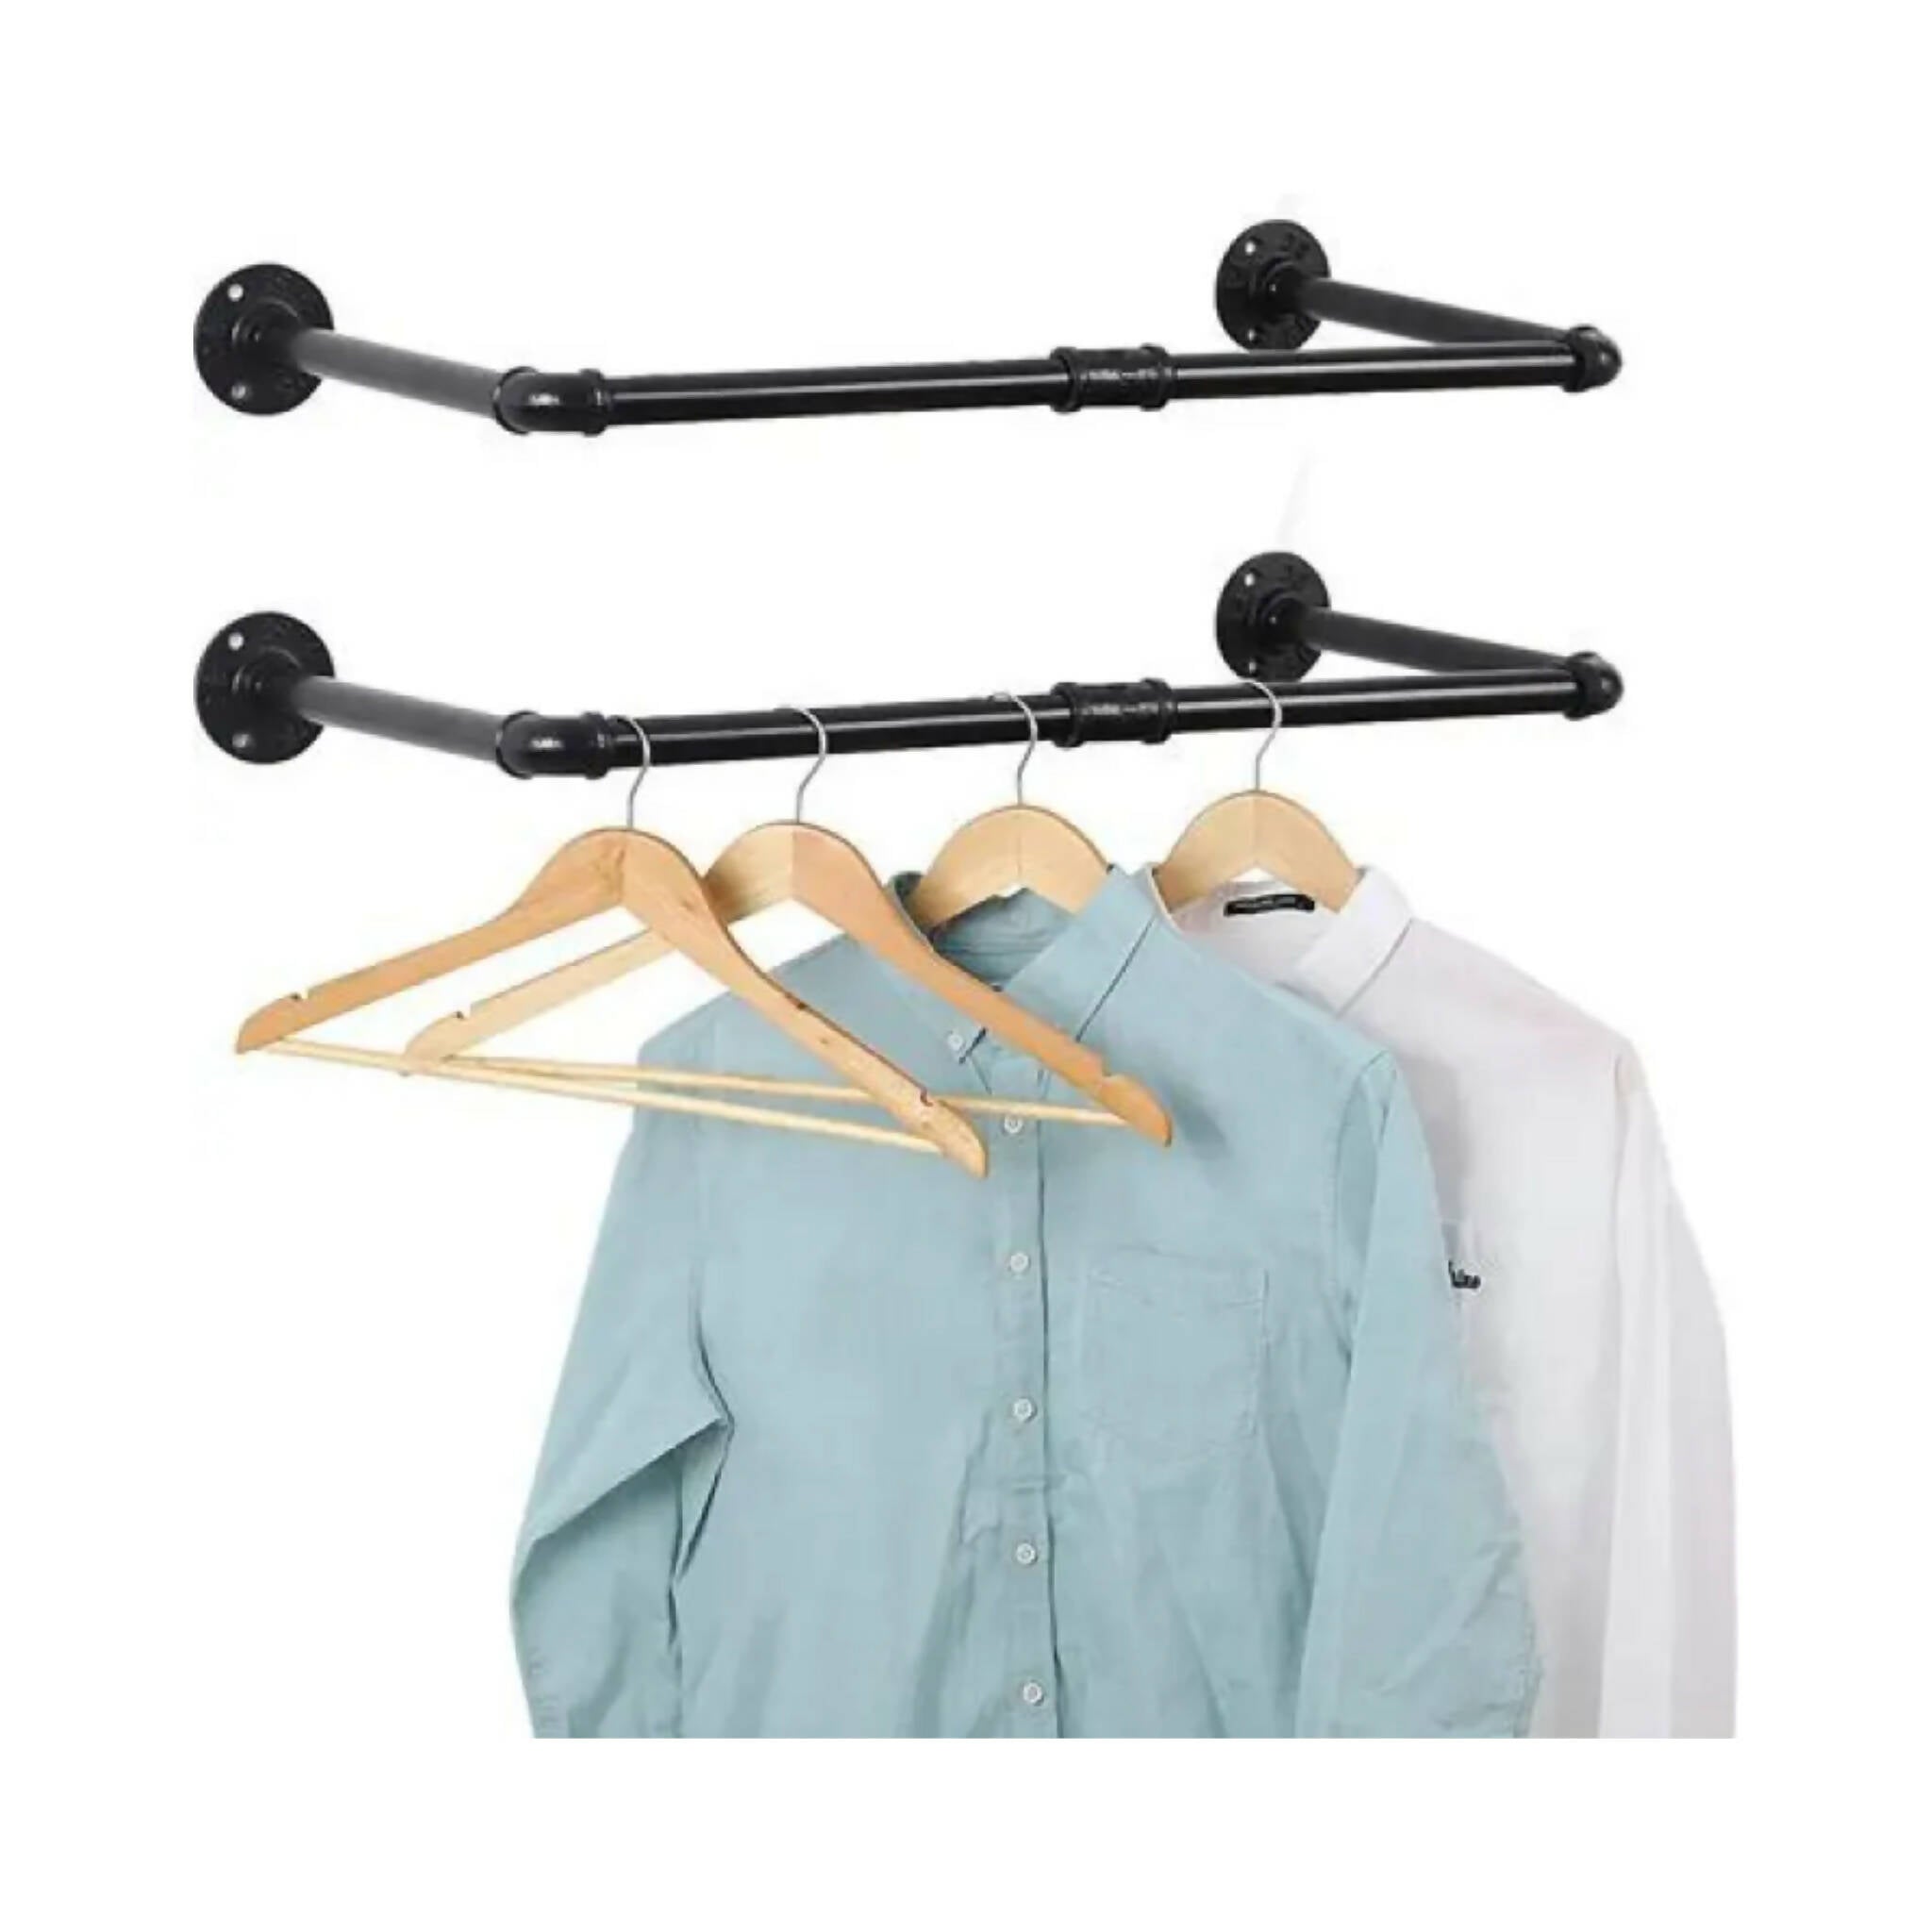 Clothes Rail, for Organized Hanging and Drying